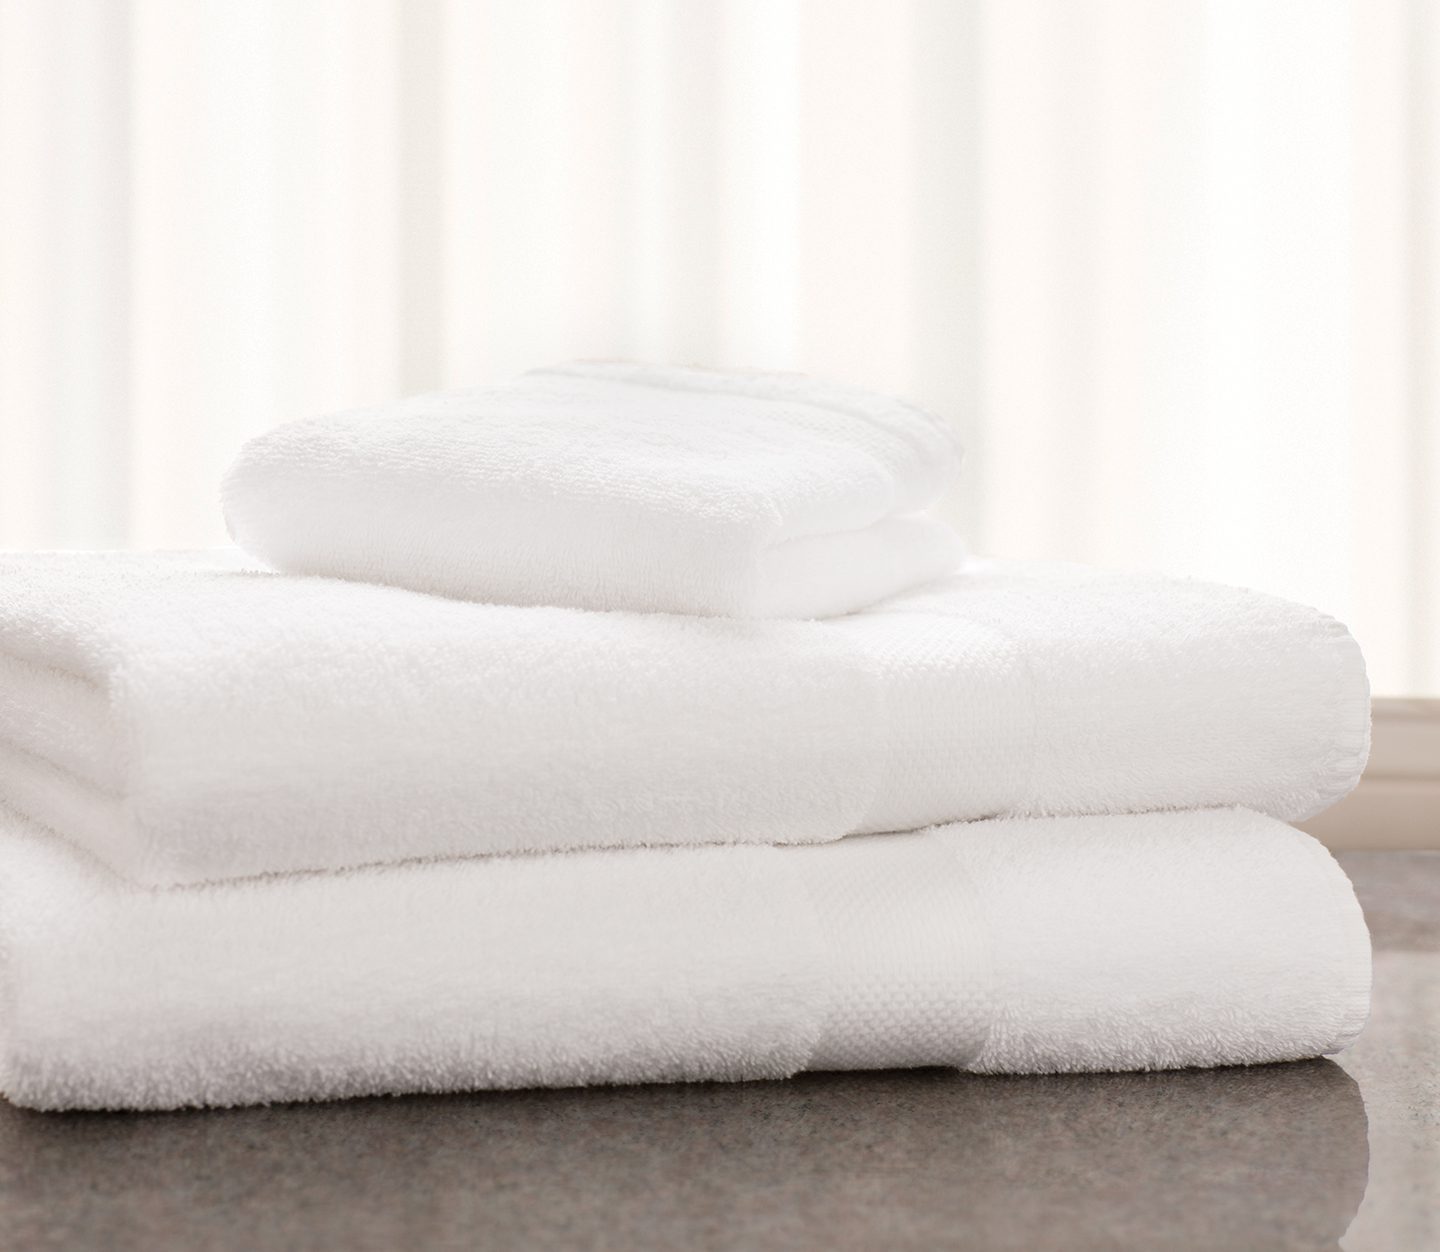 Euro Hotel Collection Cotton Guest Room Towels